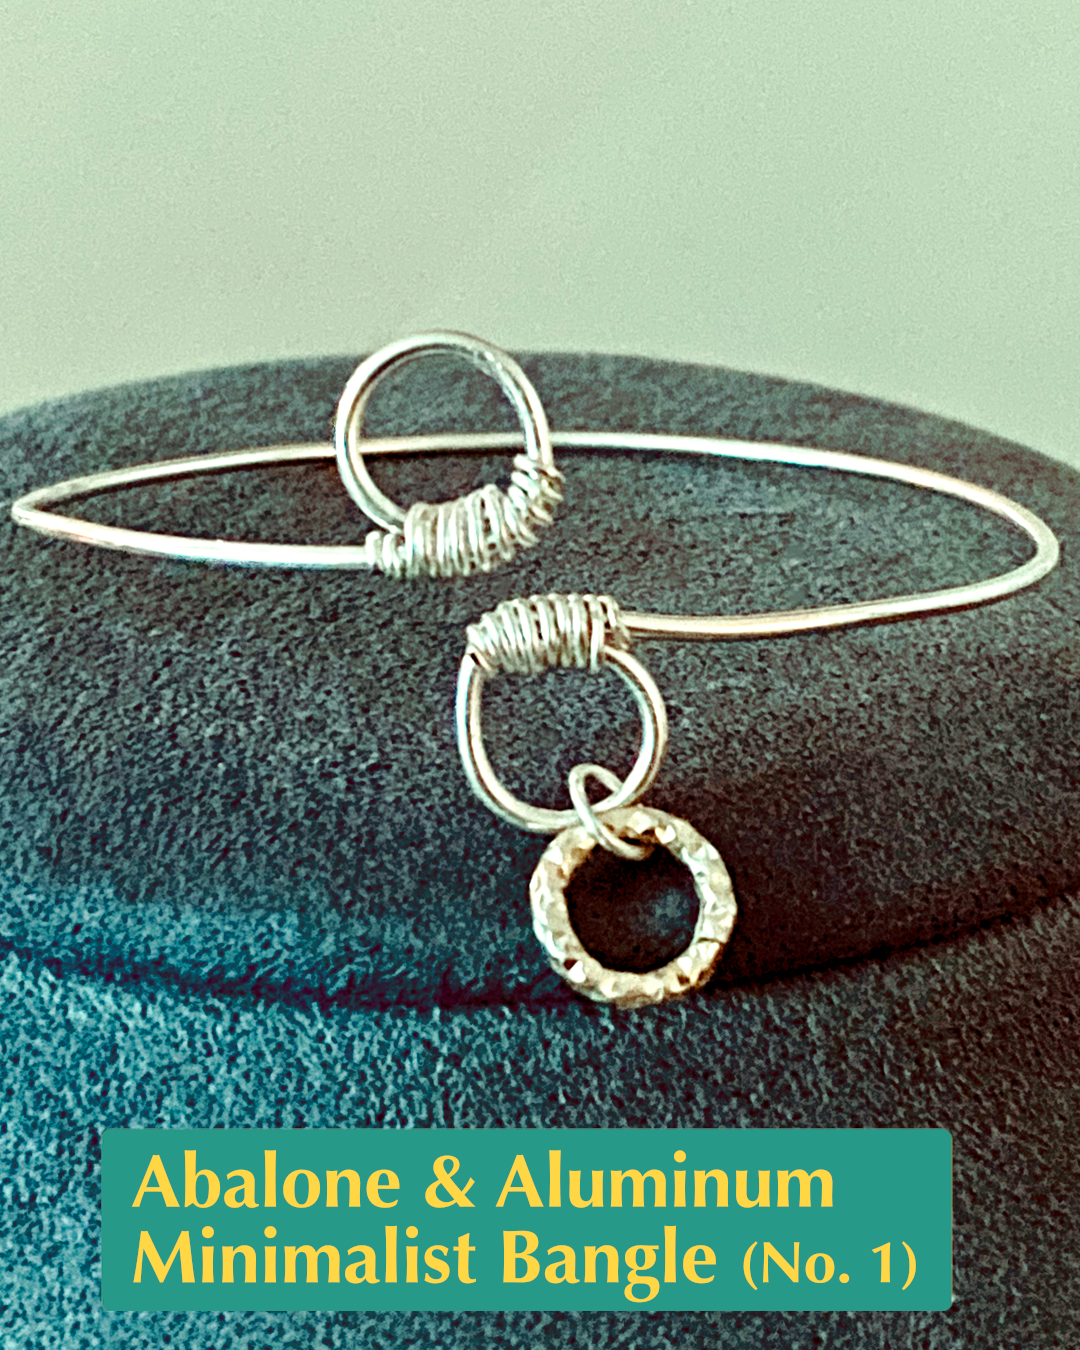 handmade silver-filled open bangle with wire wrapped circle loop ends accented with a textured circle aluminum charm